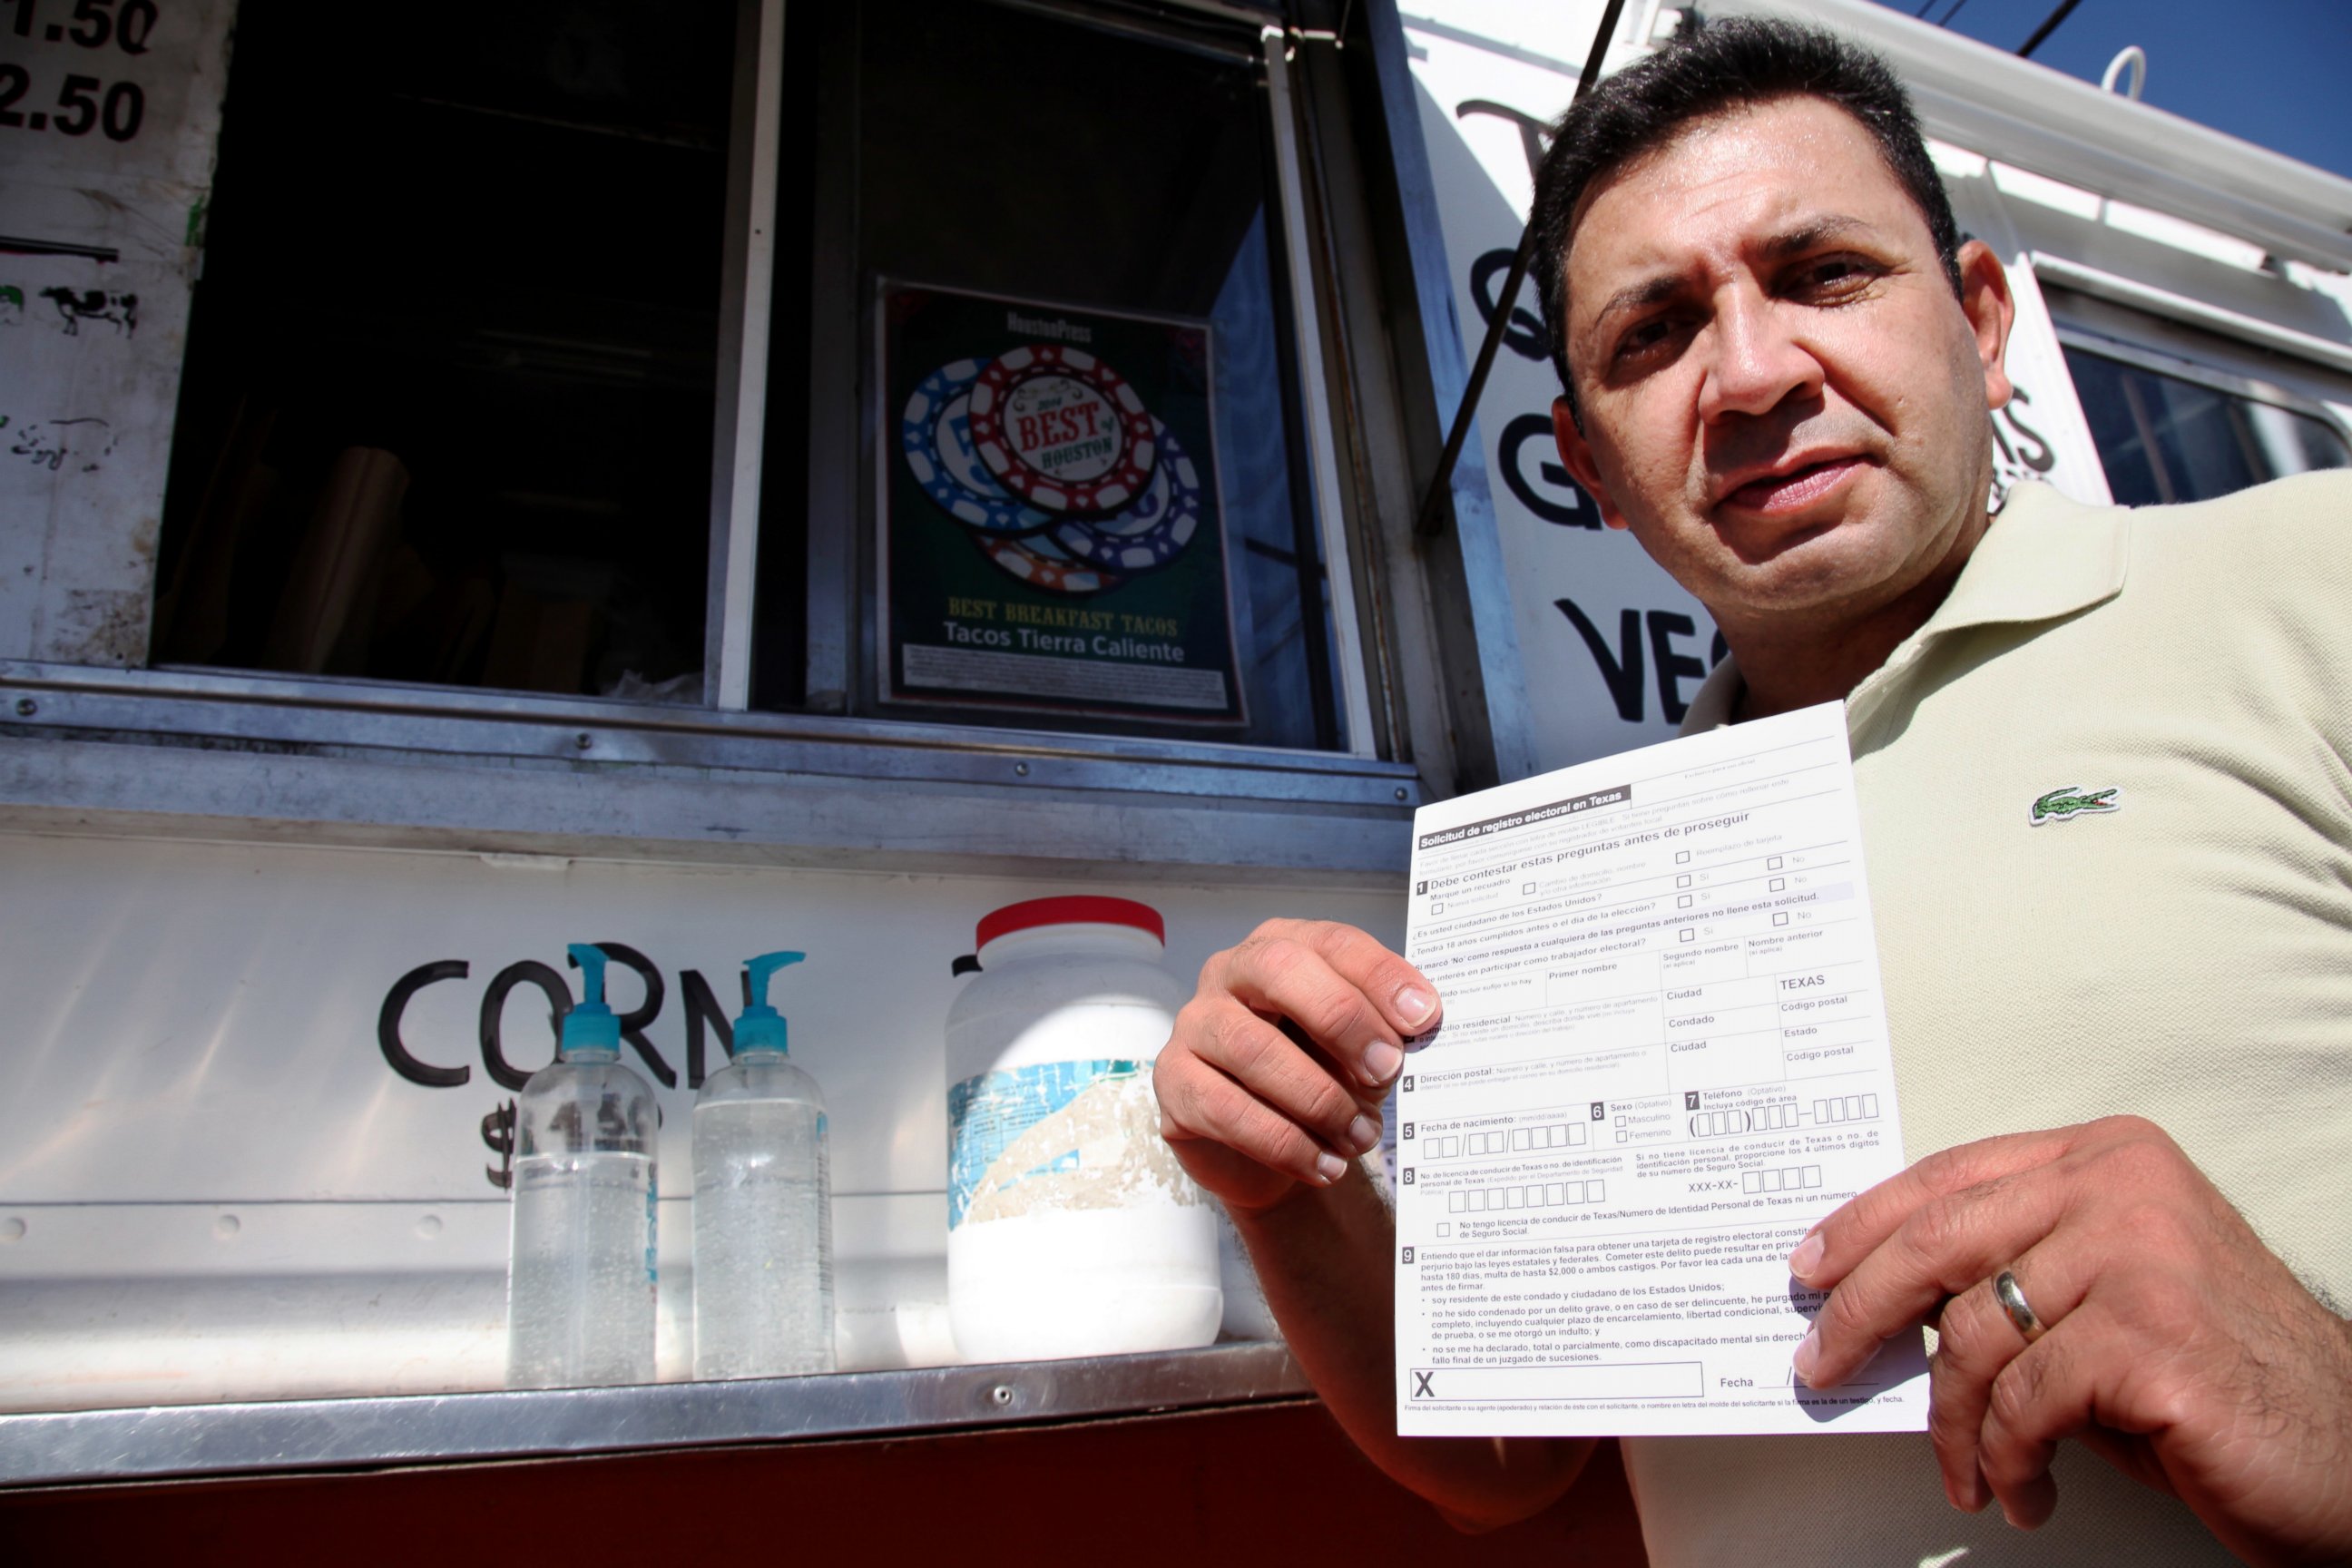 PHOTO: Carlos Zamora shows a voter registration card from a pile placed on the counter of the Tierra Caliente taco truck in this Sept. 29, 2016 image in Houston.